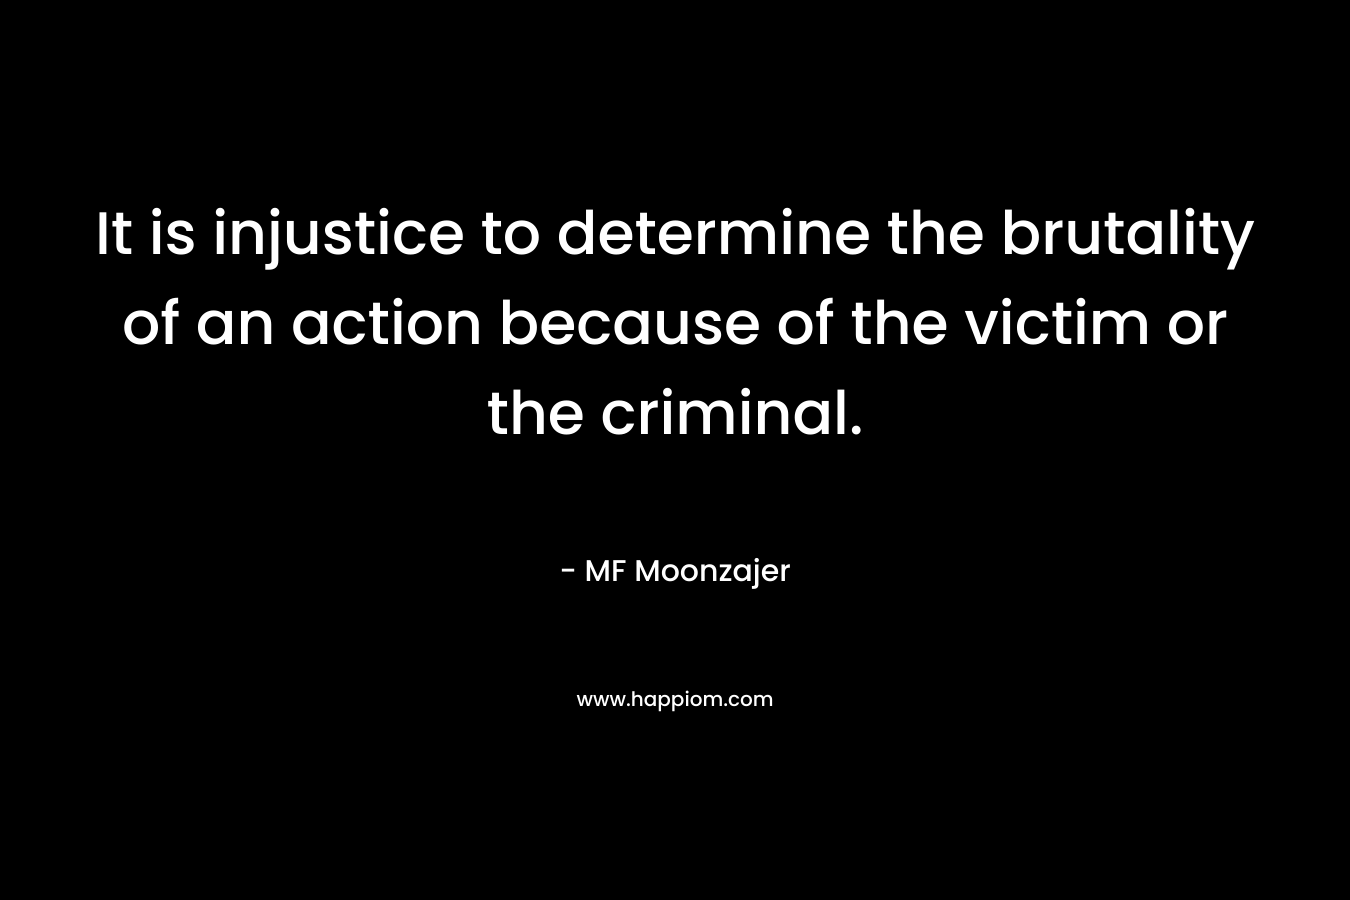 It is injustice to determine the brutality of an action because of the victim or the criminal.